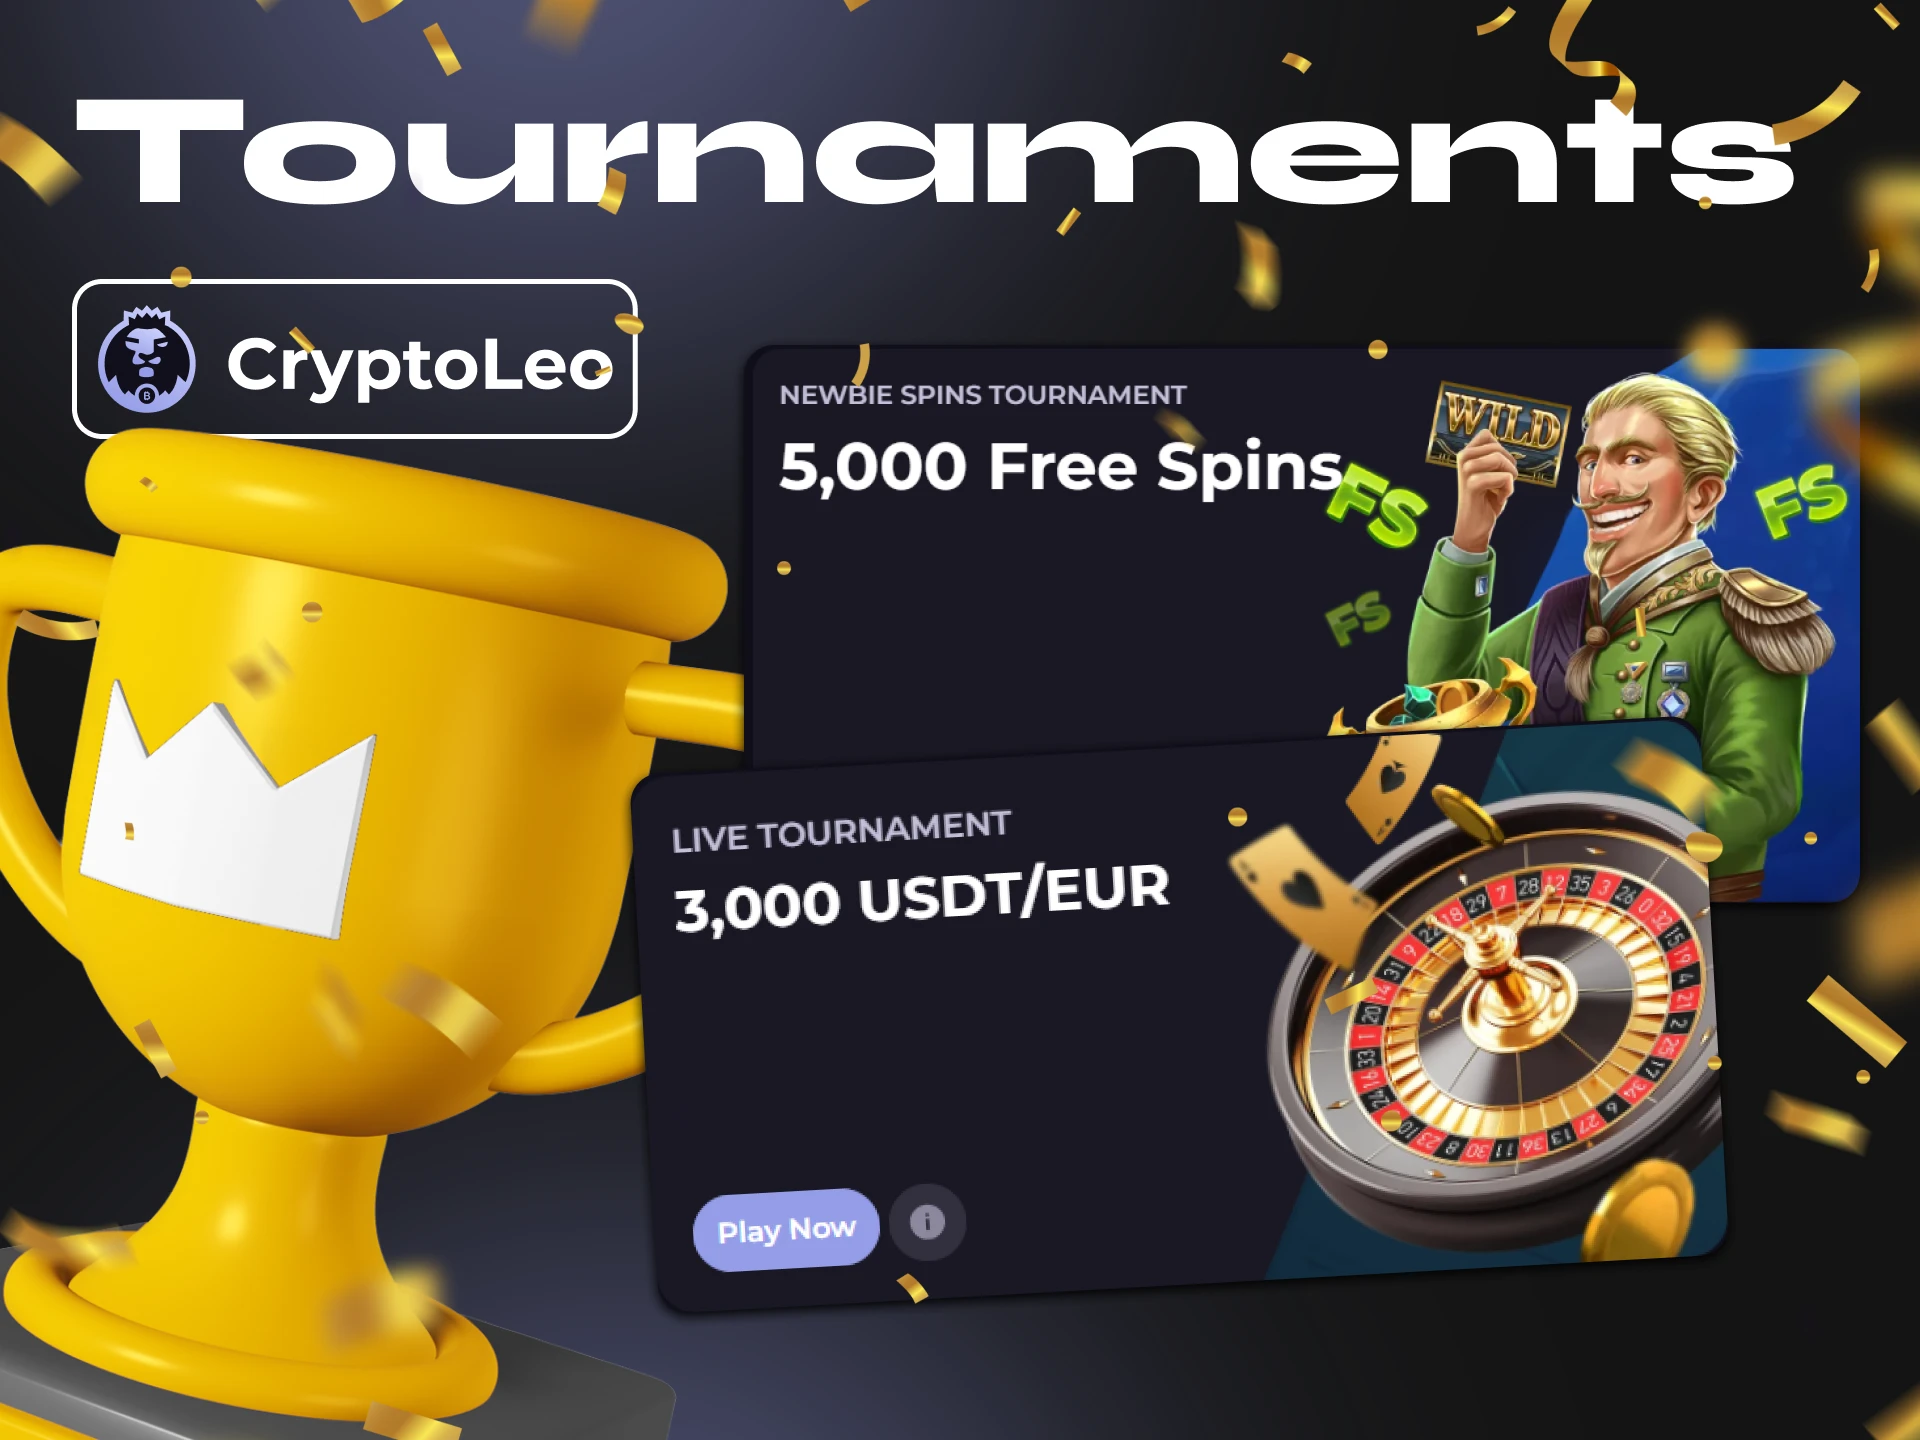 Participate in Cryptoleo tournaments and get nice prizes.